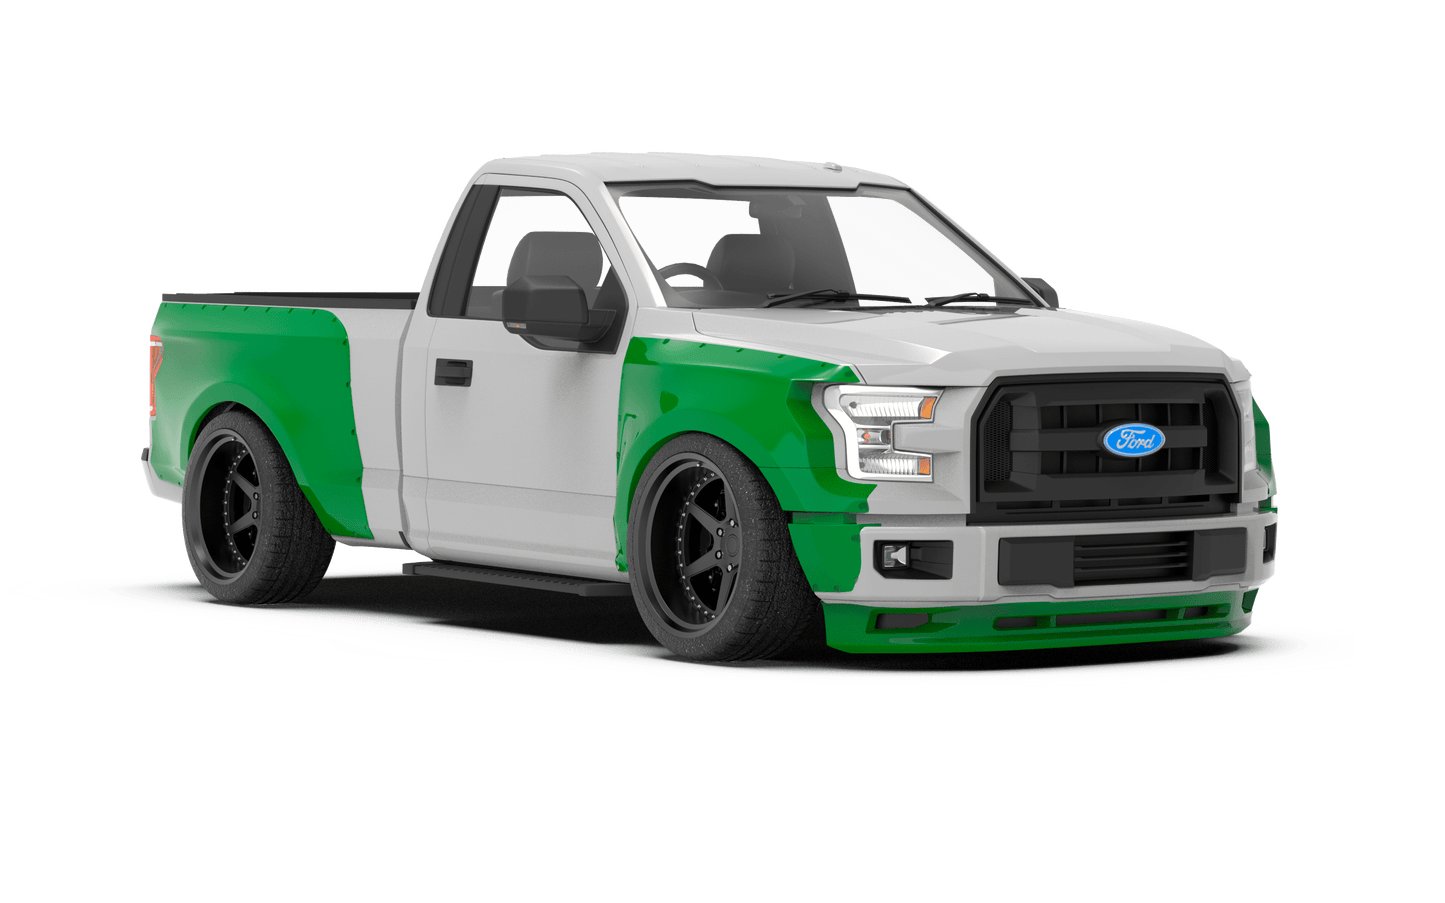 Clinched Ford F-150 (6.5 bed) Widebody Kit | ML Performance UK Car Parts